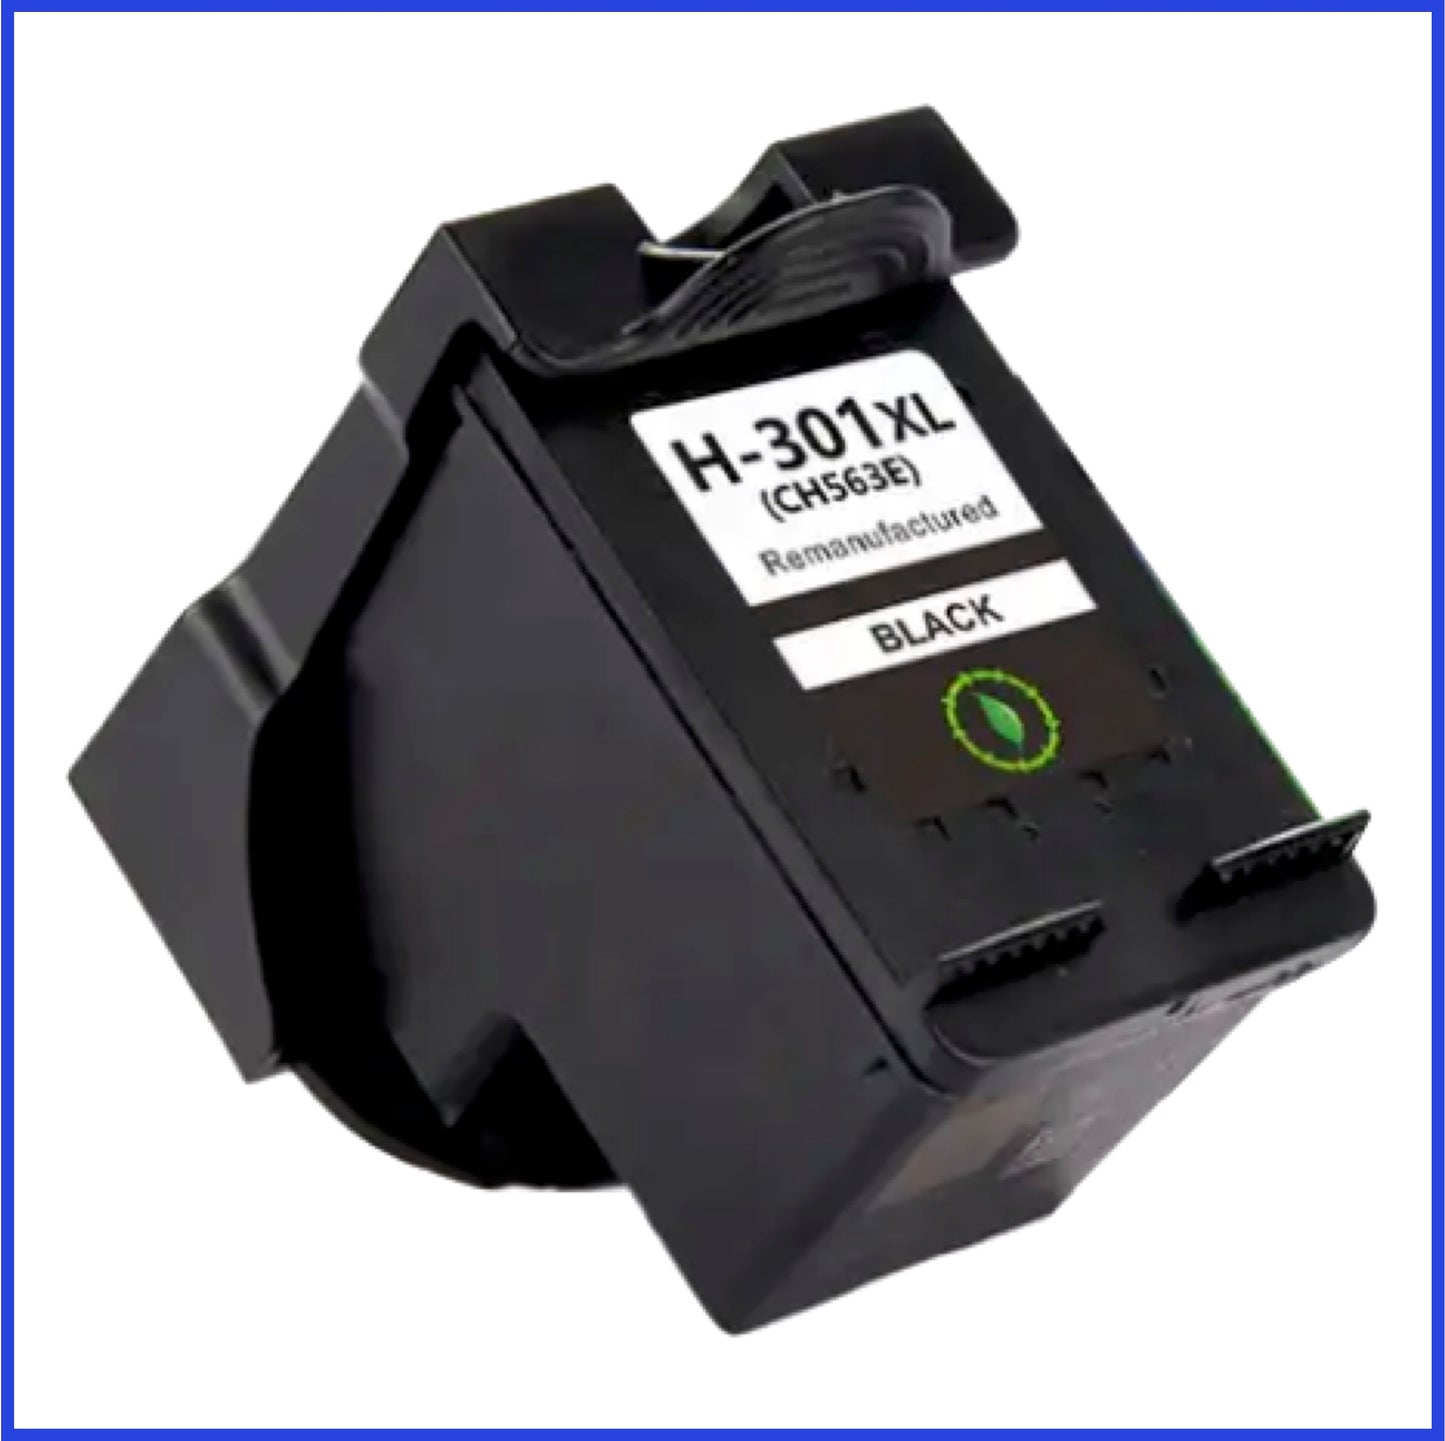 Remanufactured HP 301XL High Capacity Black Ink Cartridge (Compatible Replacement)